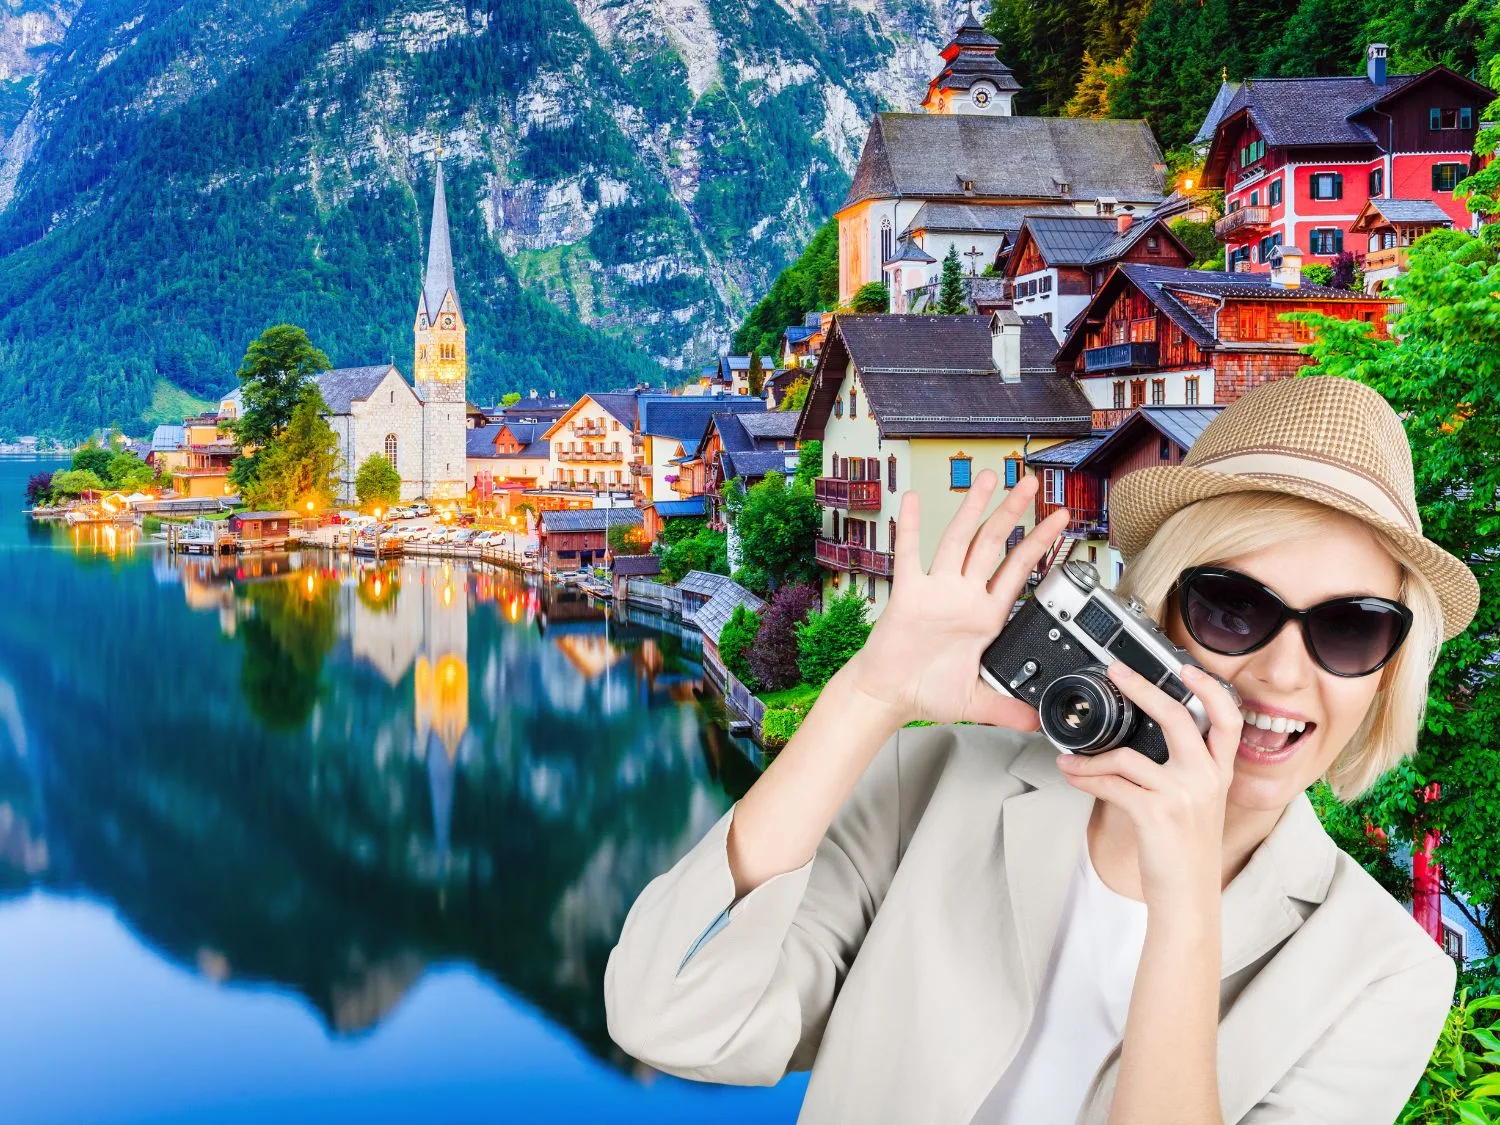 The 6 Best Austria Tours For Unforgettable Adventures That Are Achievable & Affordable!